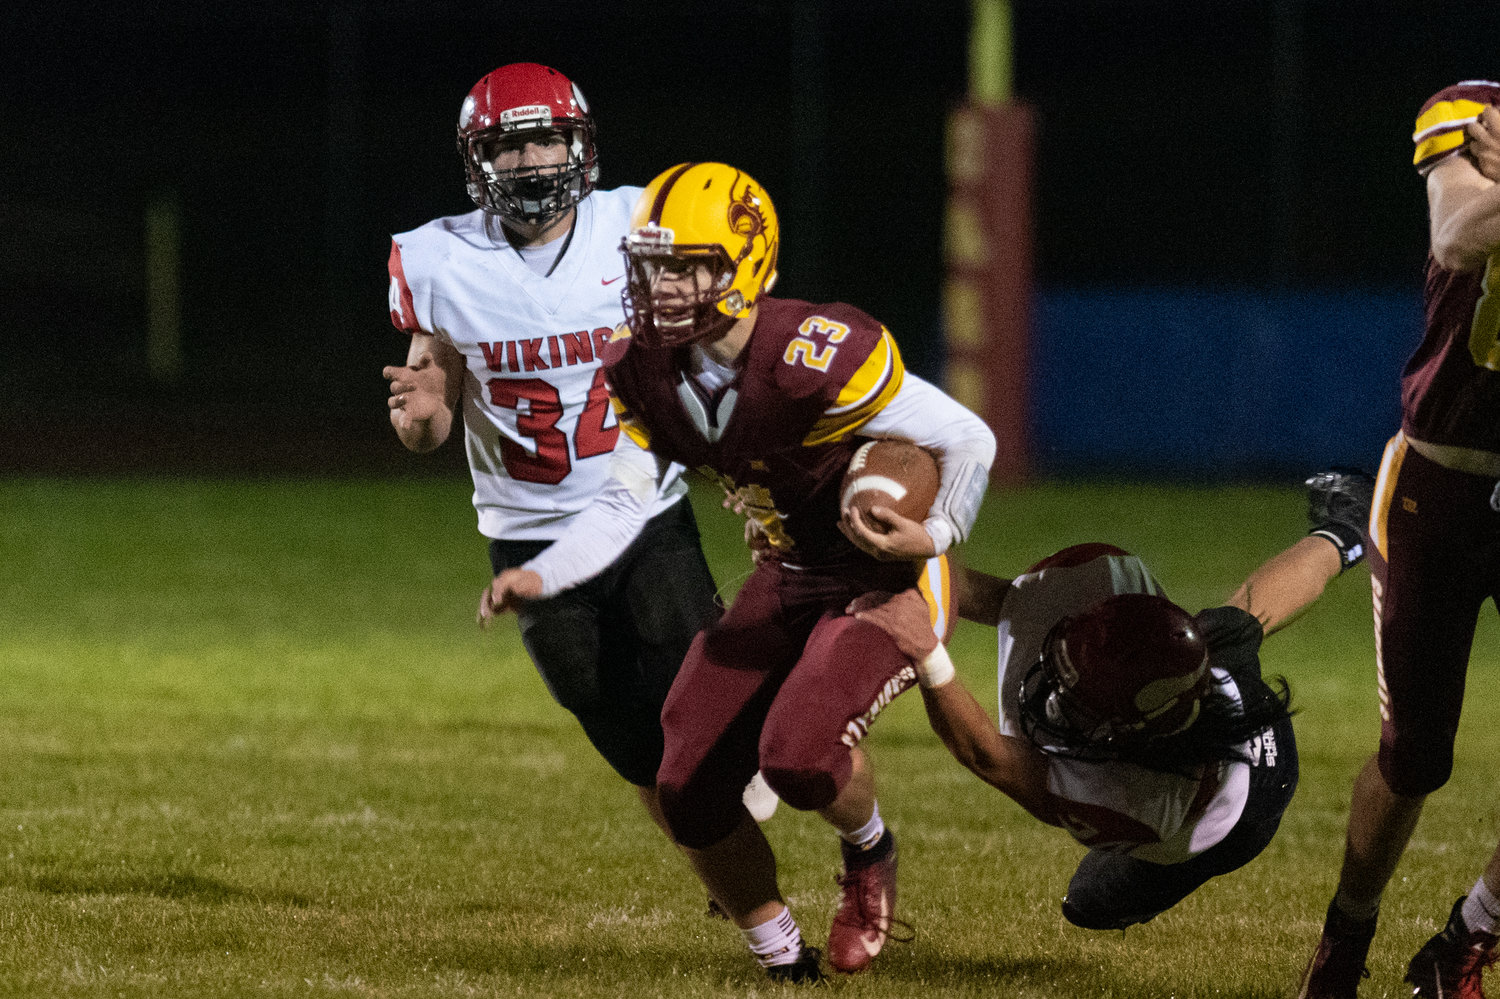 Winlock quarterback Neal Patching breaks a tackle in the Cardinals win over Mossyrock Oct. 8.